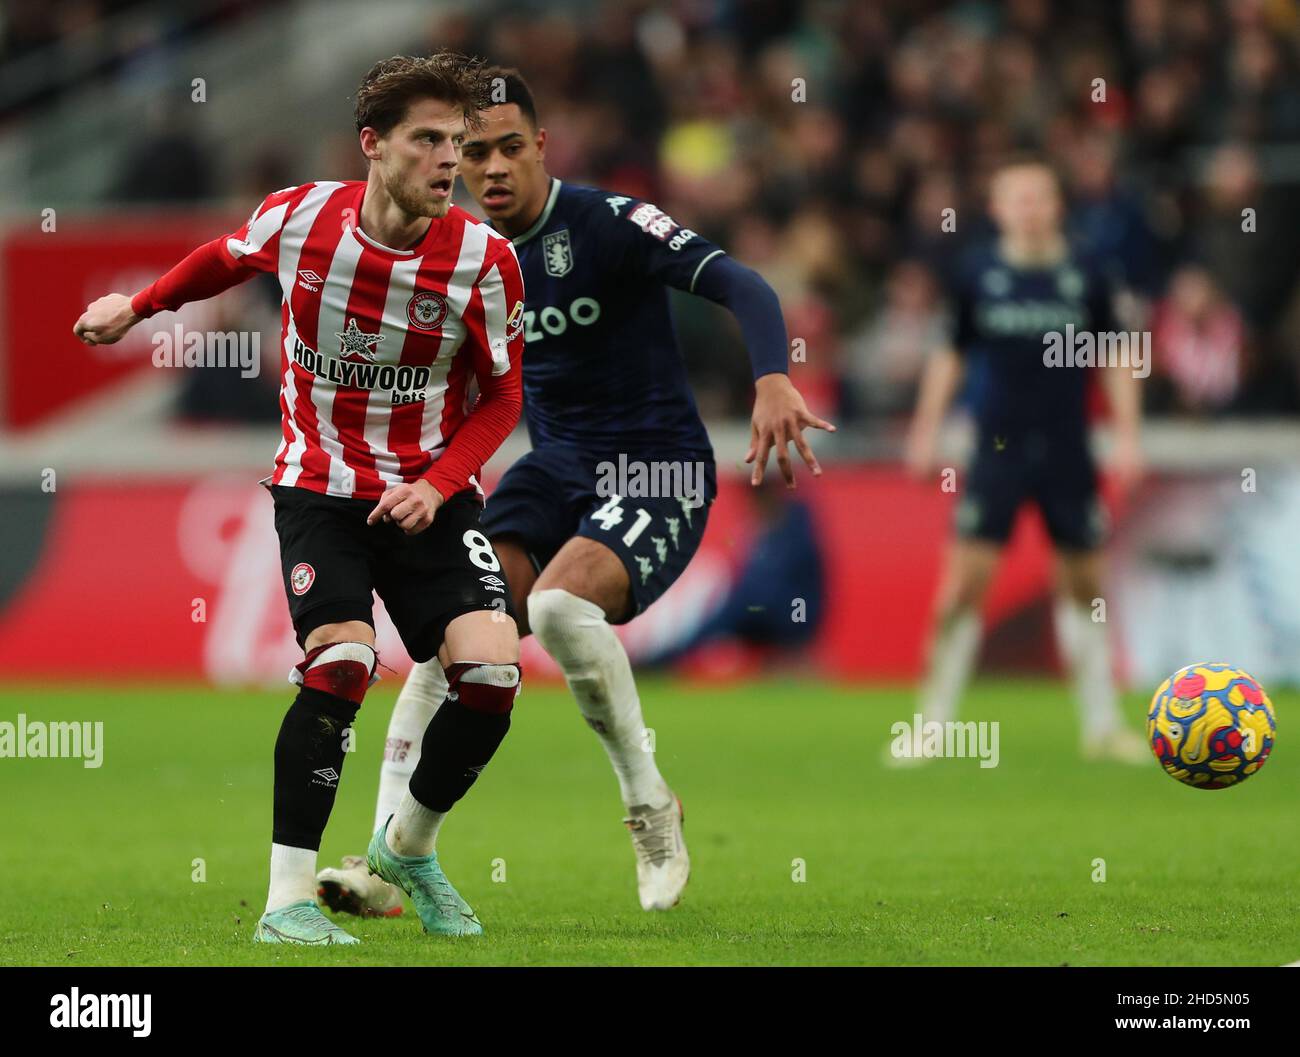 BRENTFORD, ENGLAND - JANUARY 02: Mathias Jensen of Brentford is cllosed down by Jacob Ramsey of Aston Villa during the Premier League match between Brentford and Aston Villa at Brentford Community Stadium on January 2, 2022 in Brentford, England. (Photo by Ben Peters/MB Media) Stock Photo